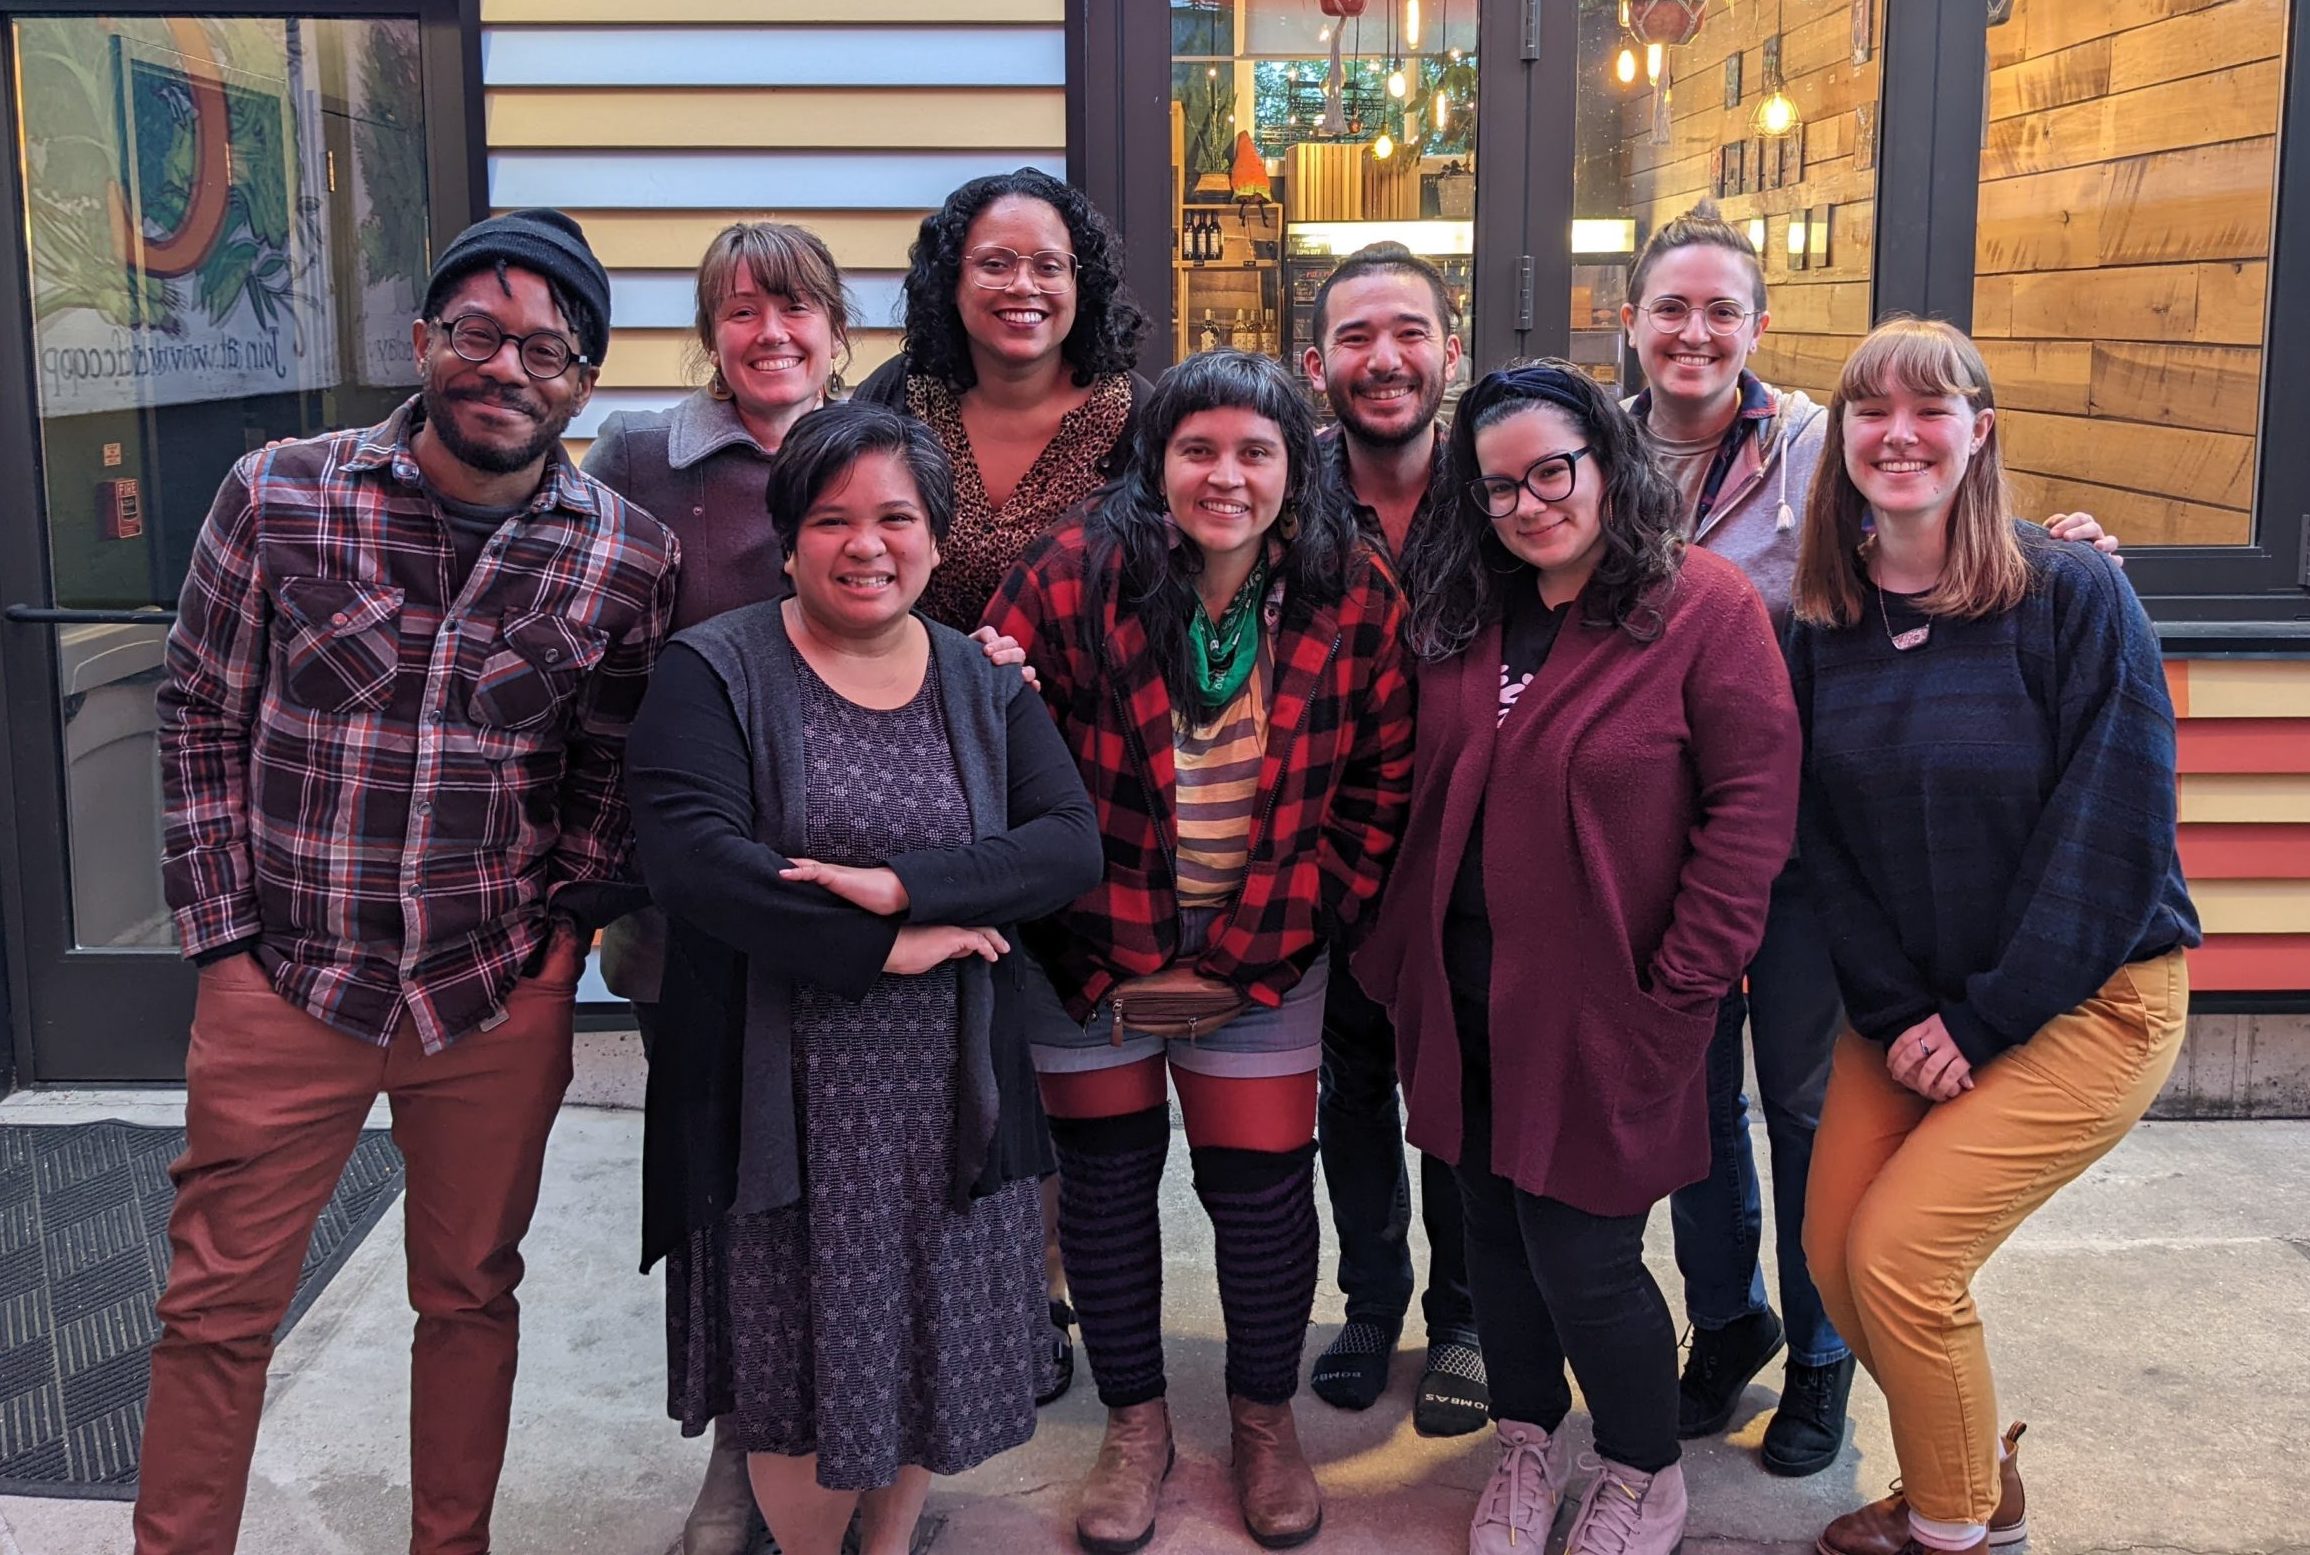 Group photo of departing staff members Gabrielle Chapman, Ana Martina Rivas, and Daniel Park, surrounded by fellow staff members.